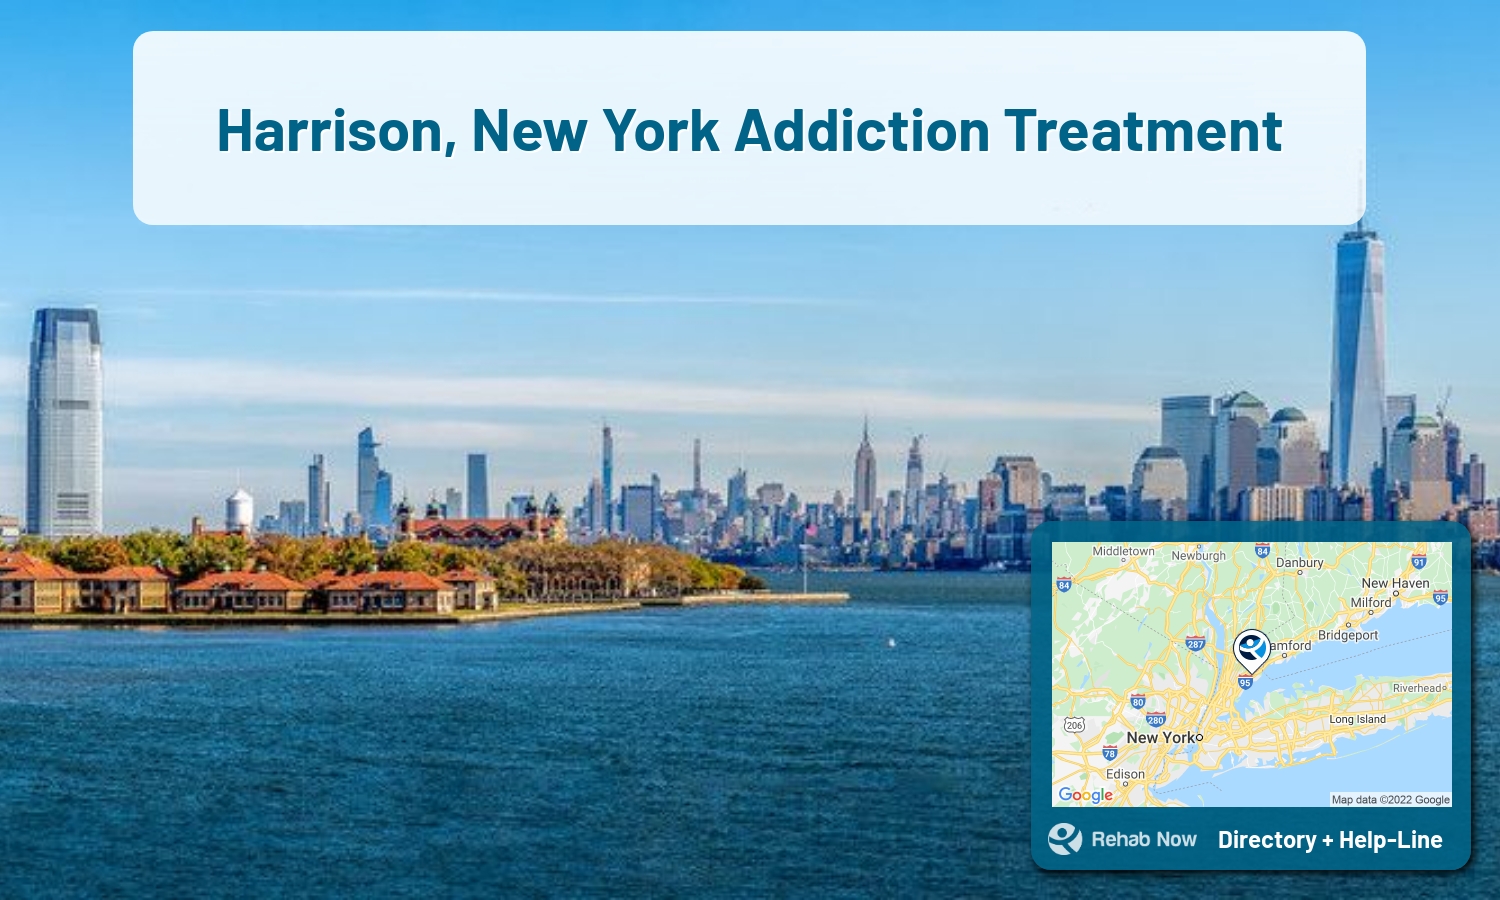 View options, availability, treatment methods, and more, for drug rehab and alcohol treatment in Harrison, New York